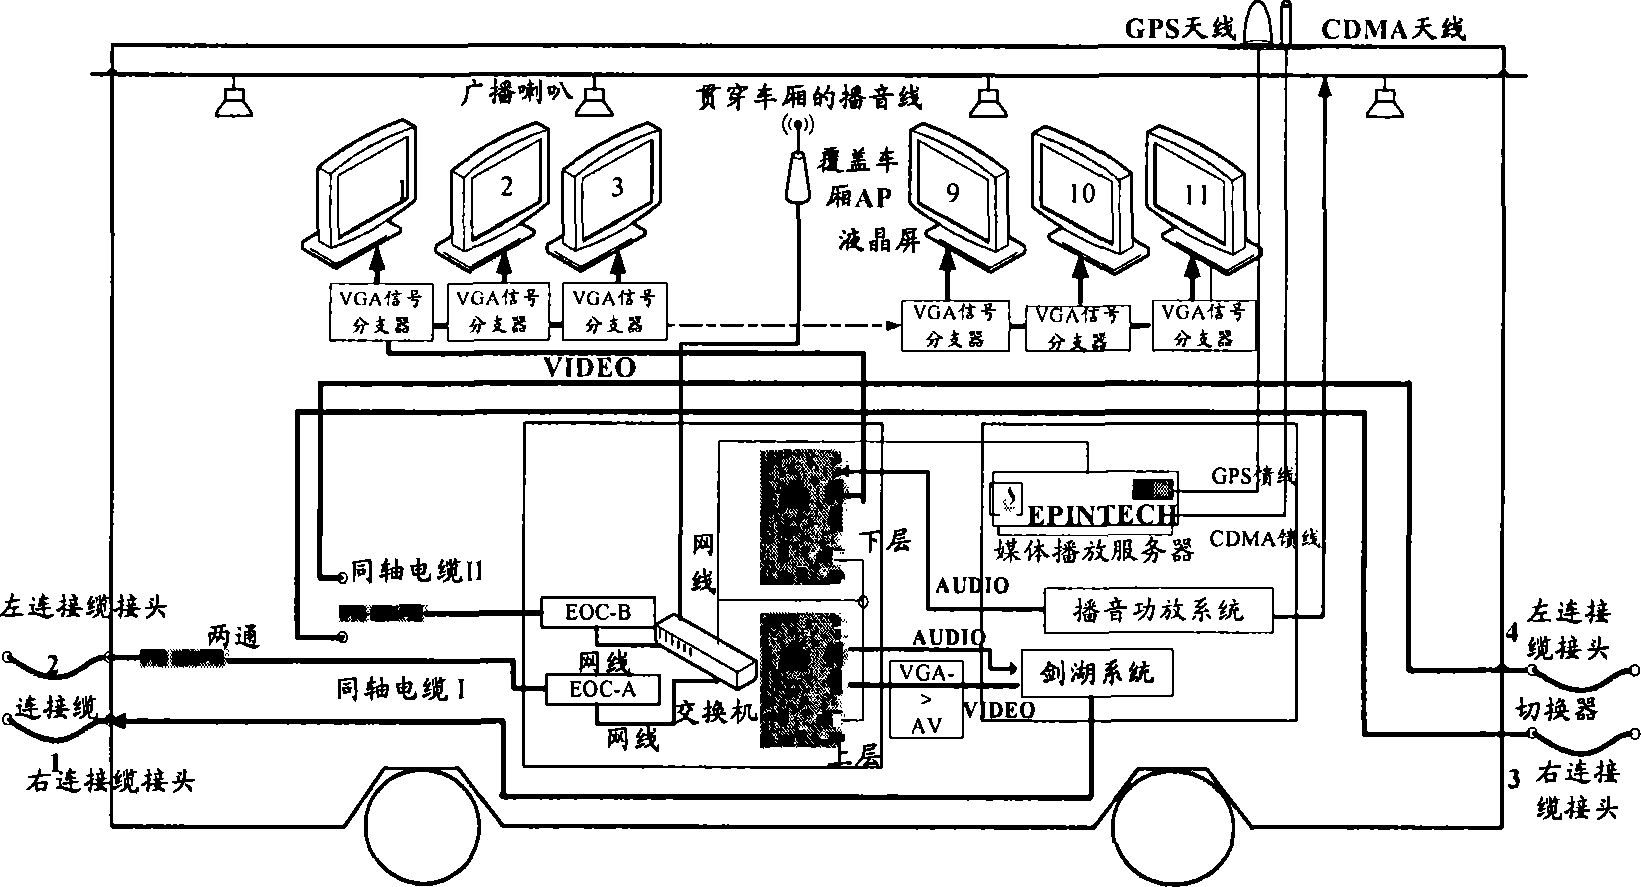 Information system for passenger train broadcasting box and non broadcasting box